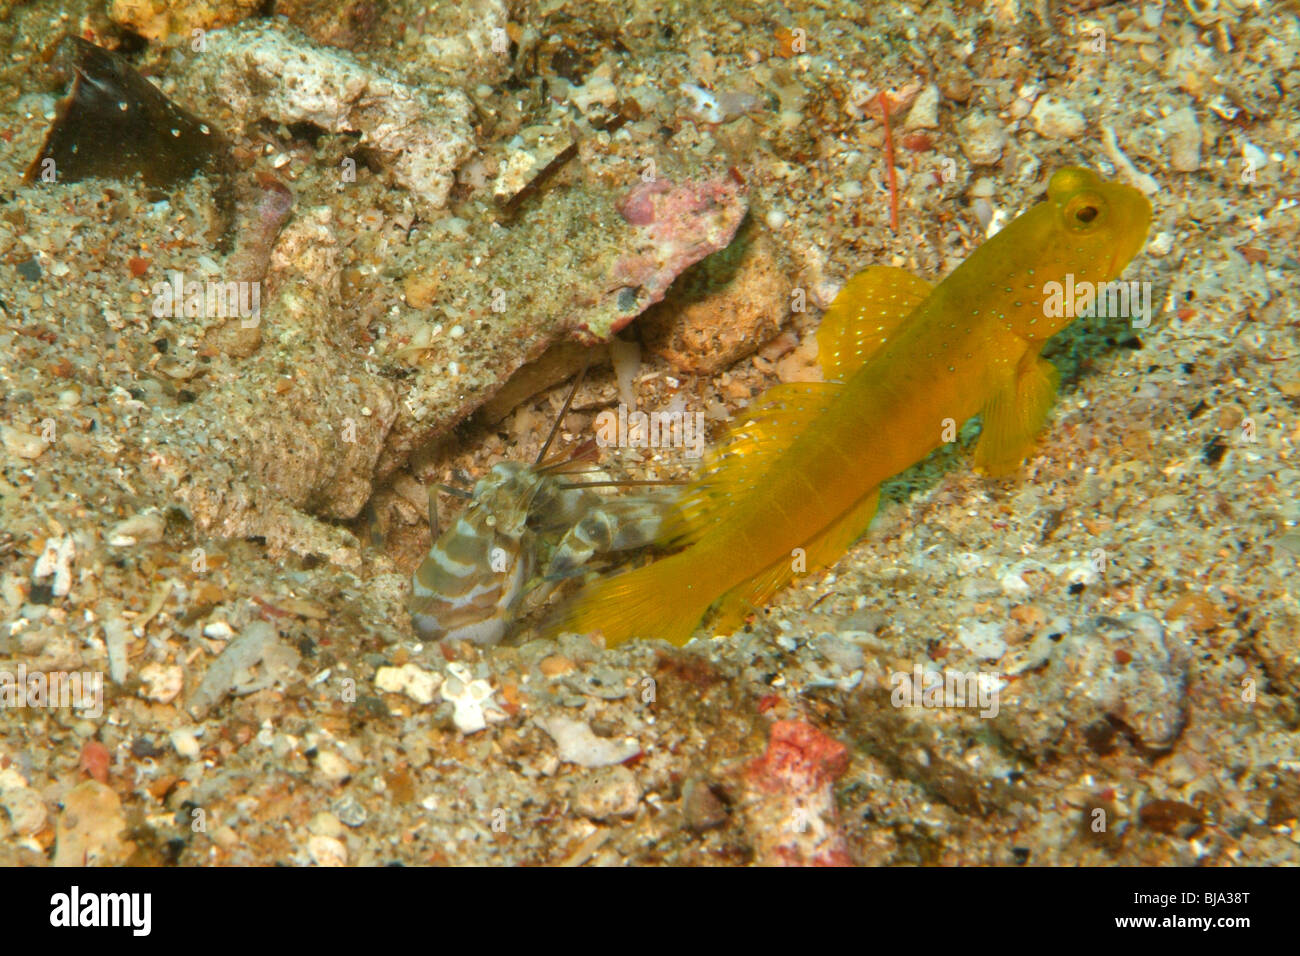 Banded shrimpgoby in Raja Ampat, Pacific ocean. Stock Photo